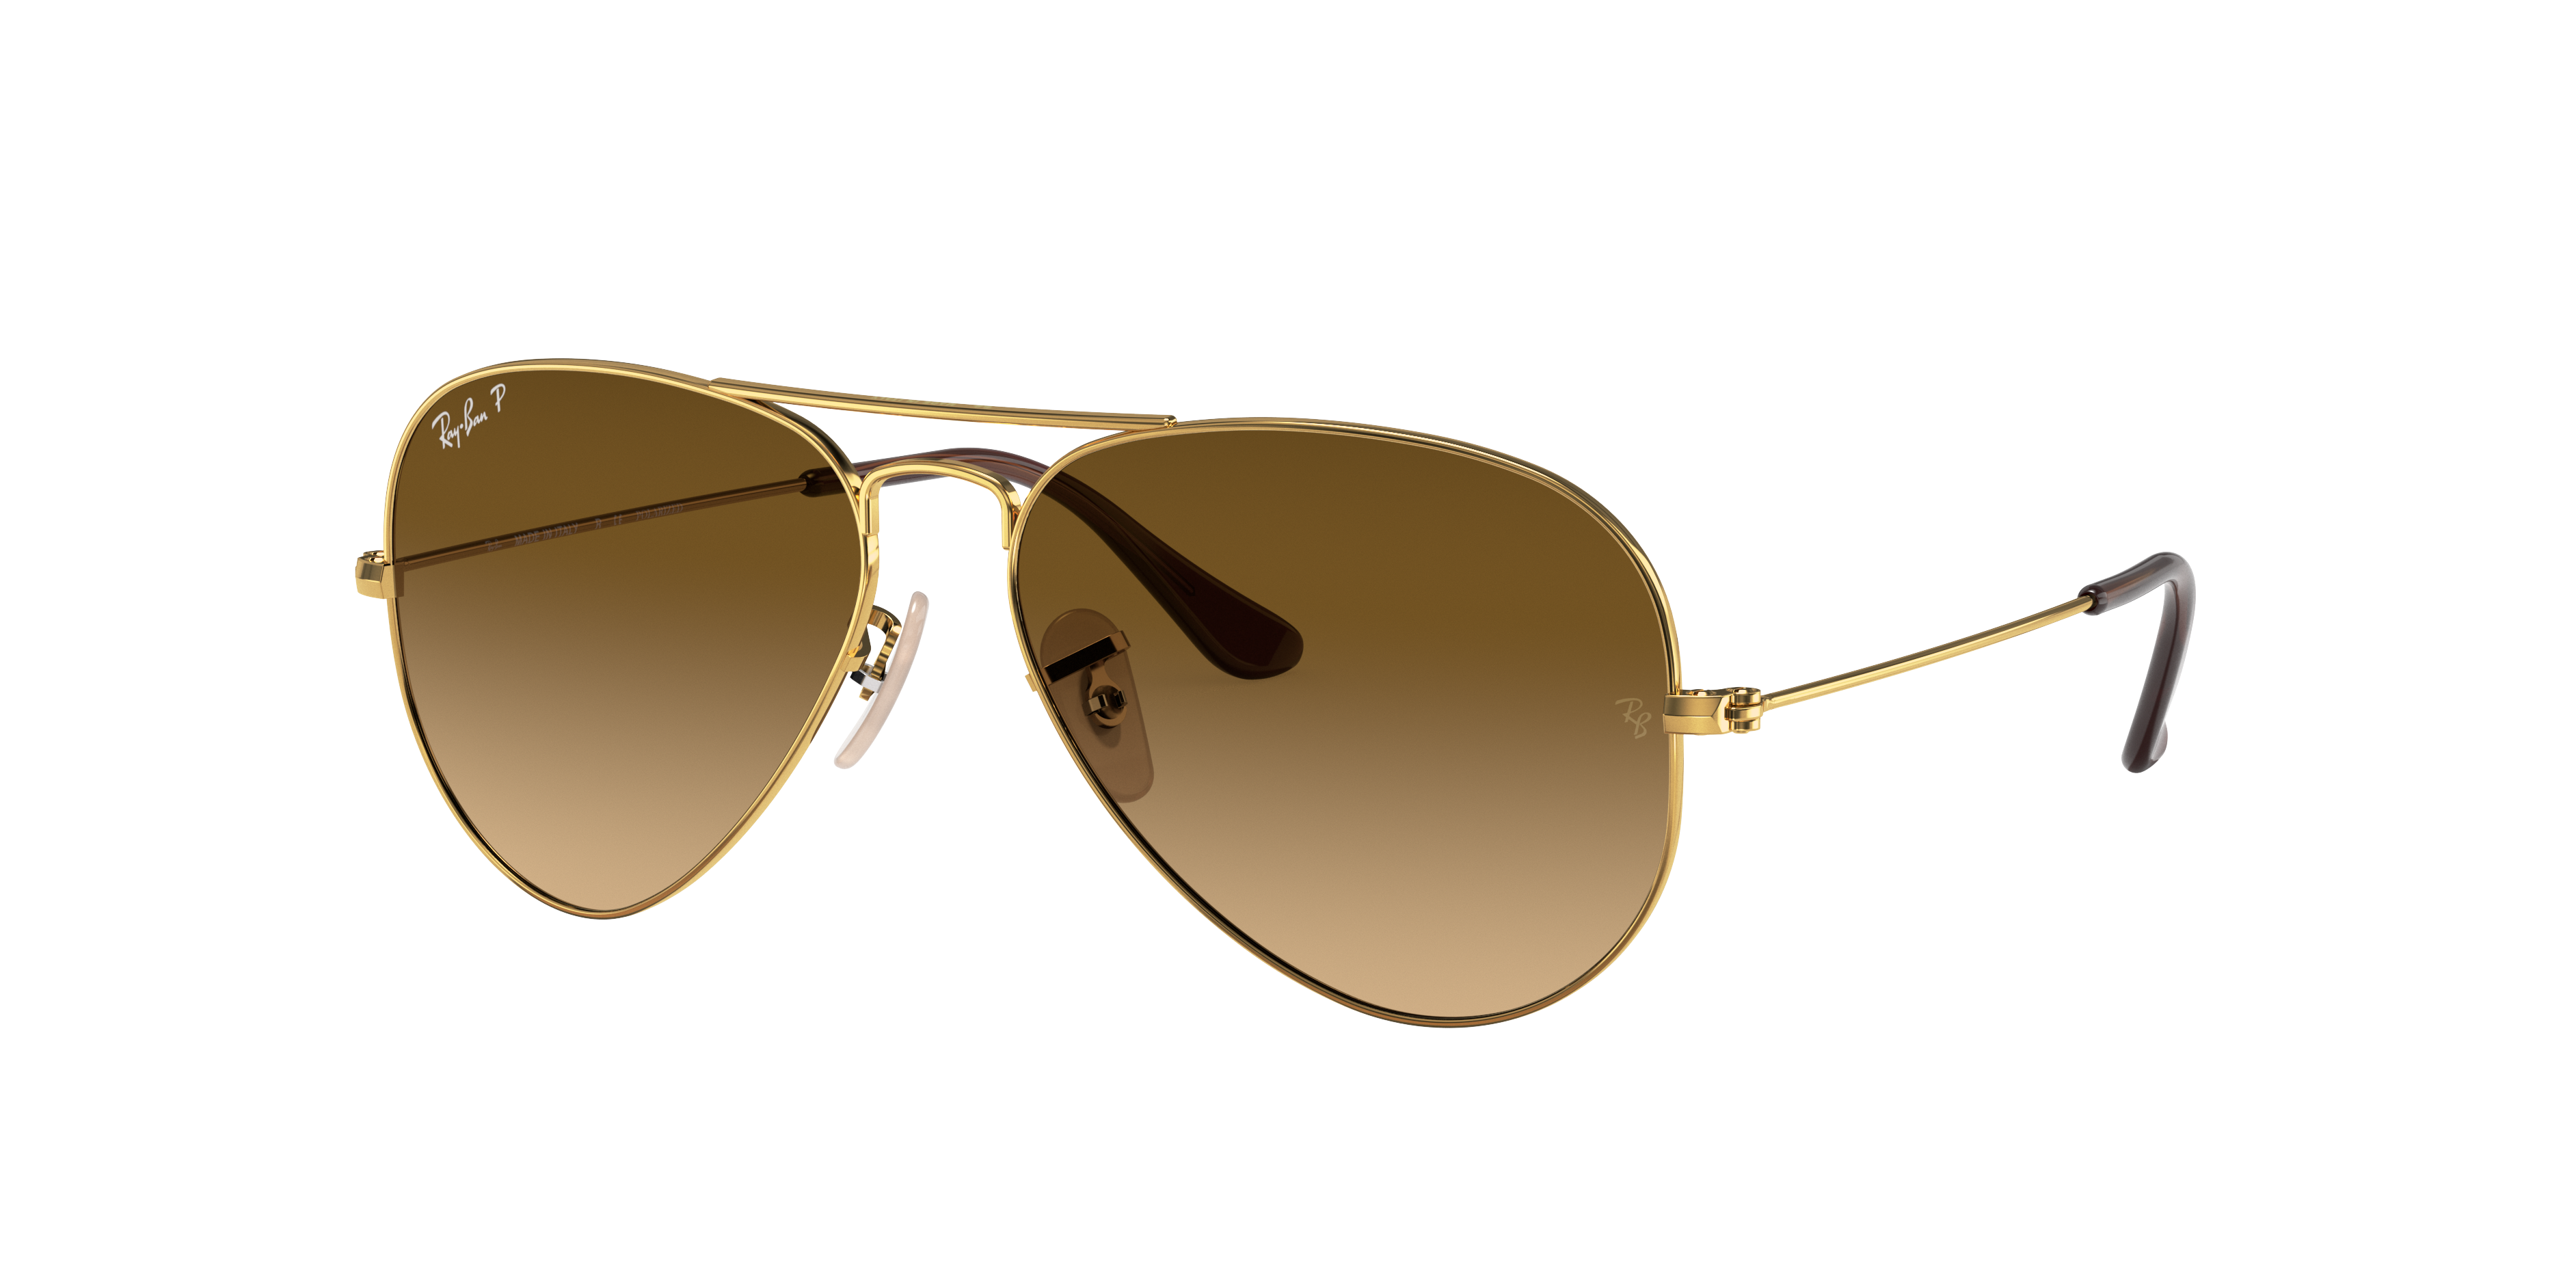 Ray-Ban Aviator Classic Sunglasses LensCrafters